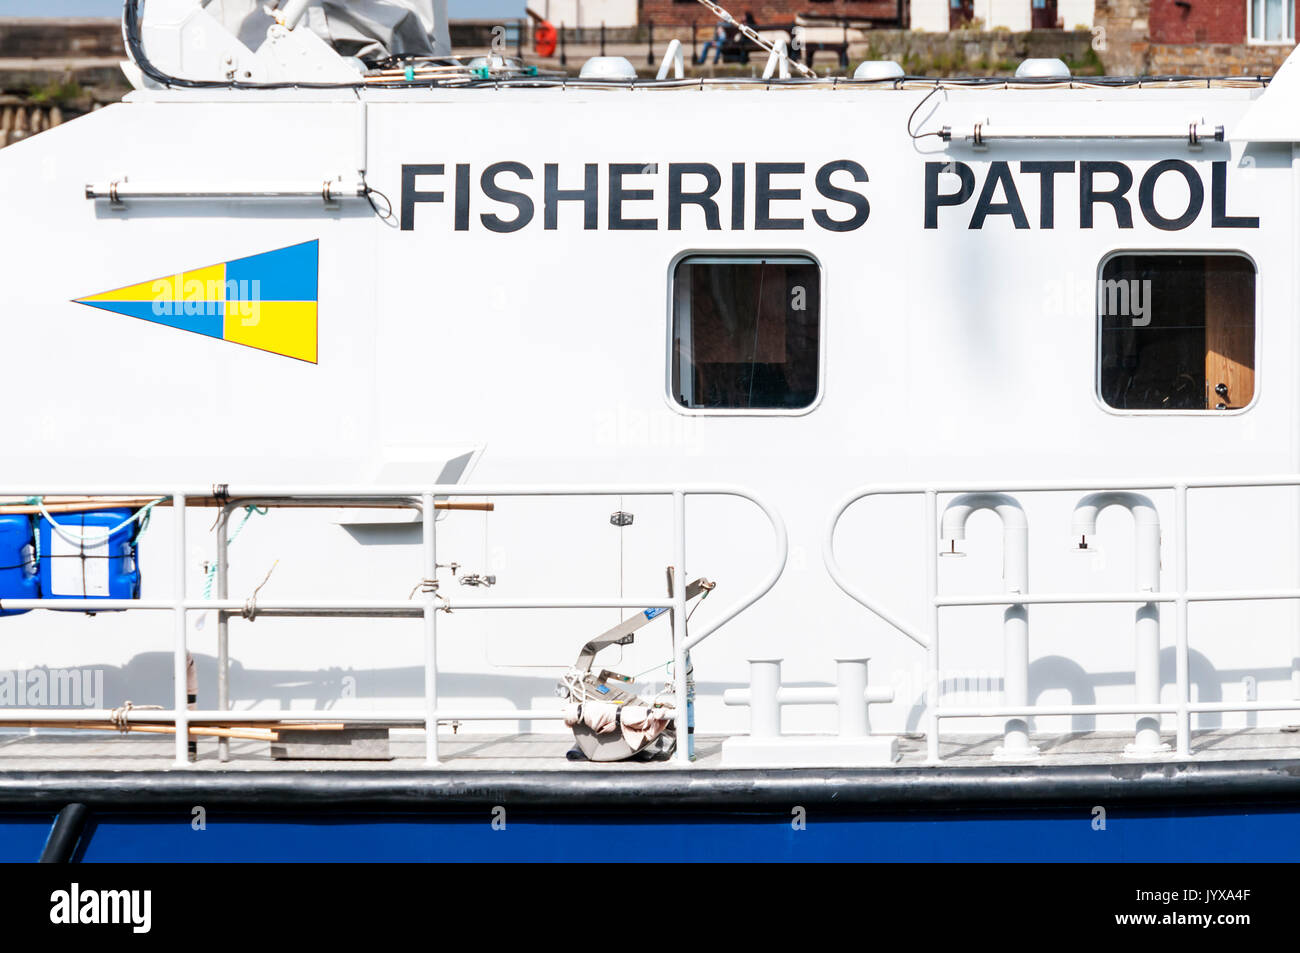 A fisheries patrol vessel of the UK Inshore Fisheries and Conservation Authority. Stock Photo